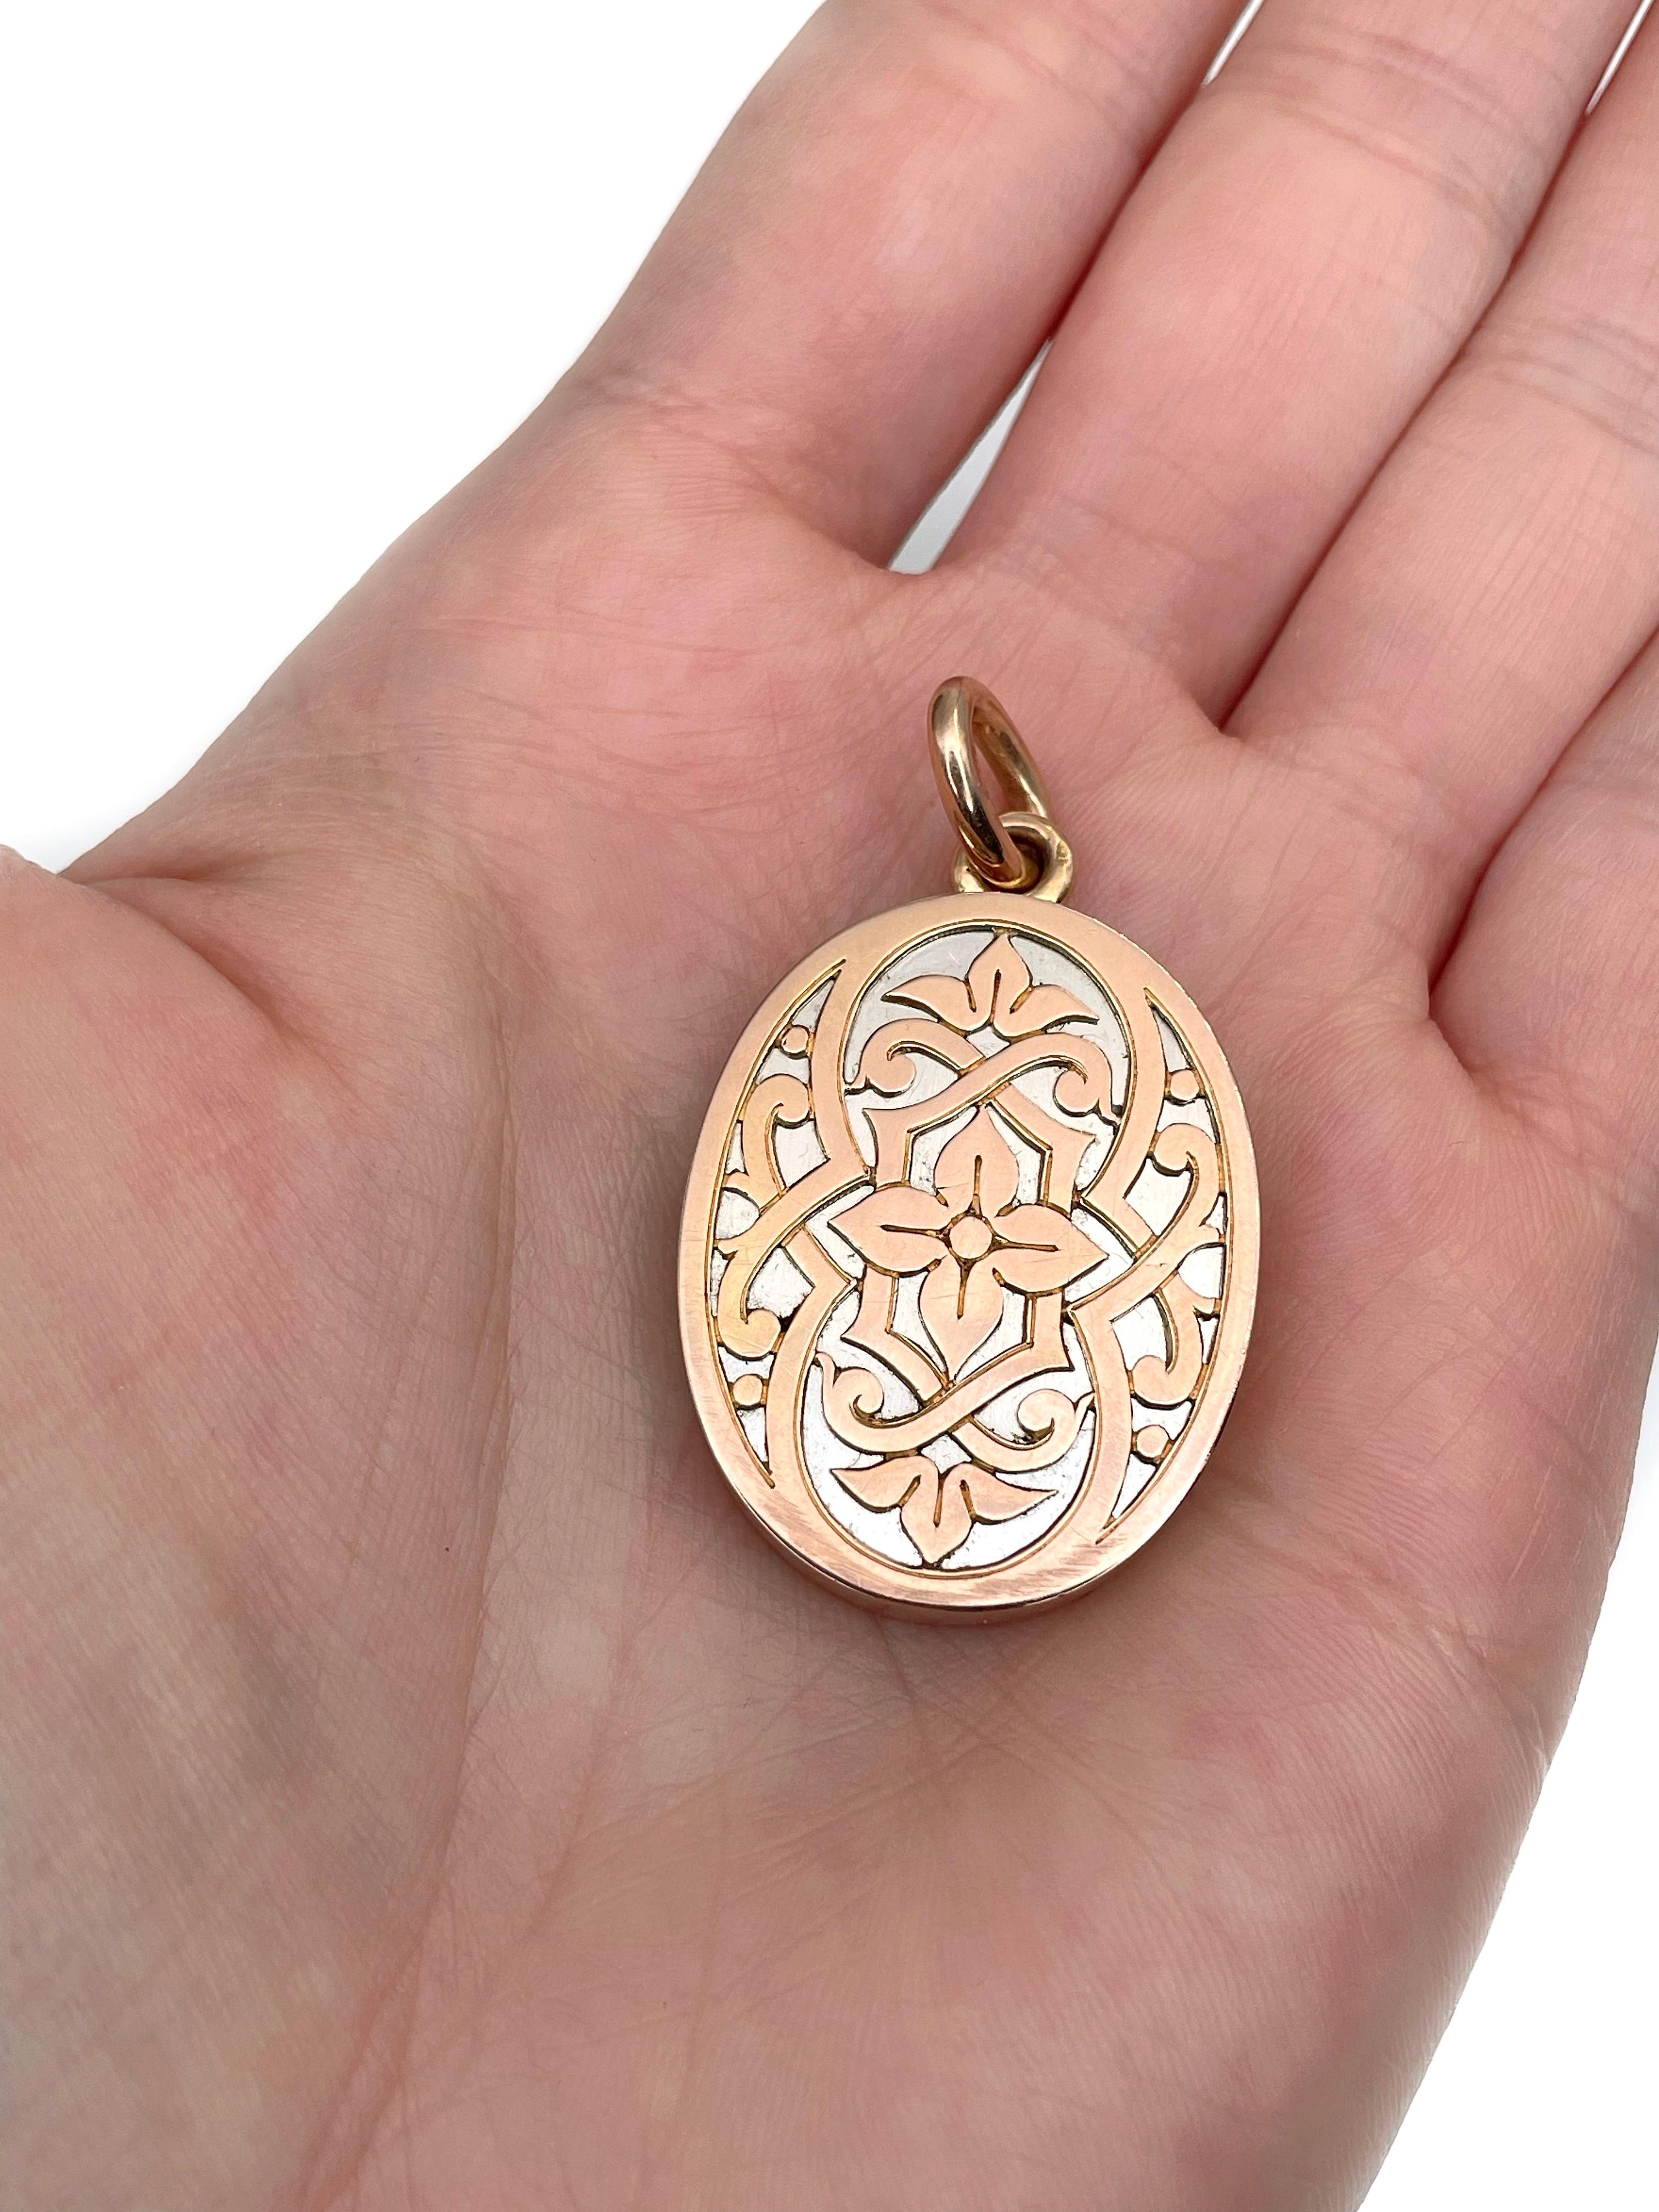 This is an Edwardian oval shape locket pendant crafted in 18K bi-colour gold. Circa 1910. 

The piece features arabesque ornaments. The back side is engraved with the initials and a crown.

There is a space for pictures inside. 

Weight: